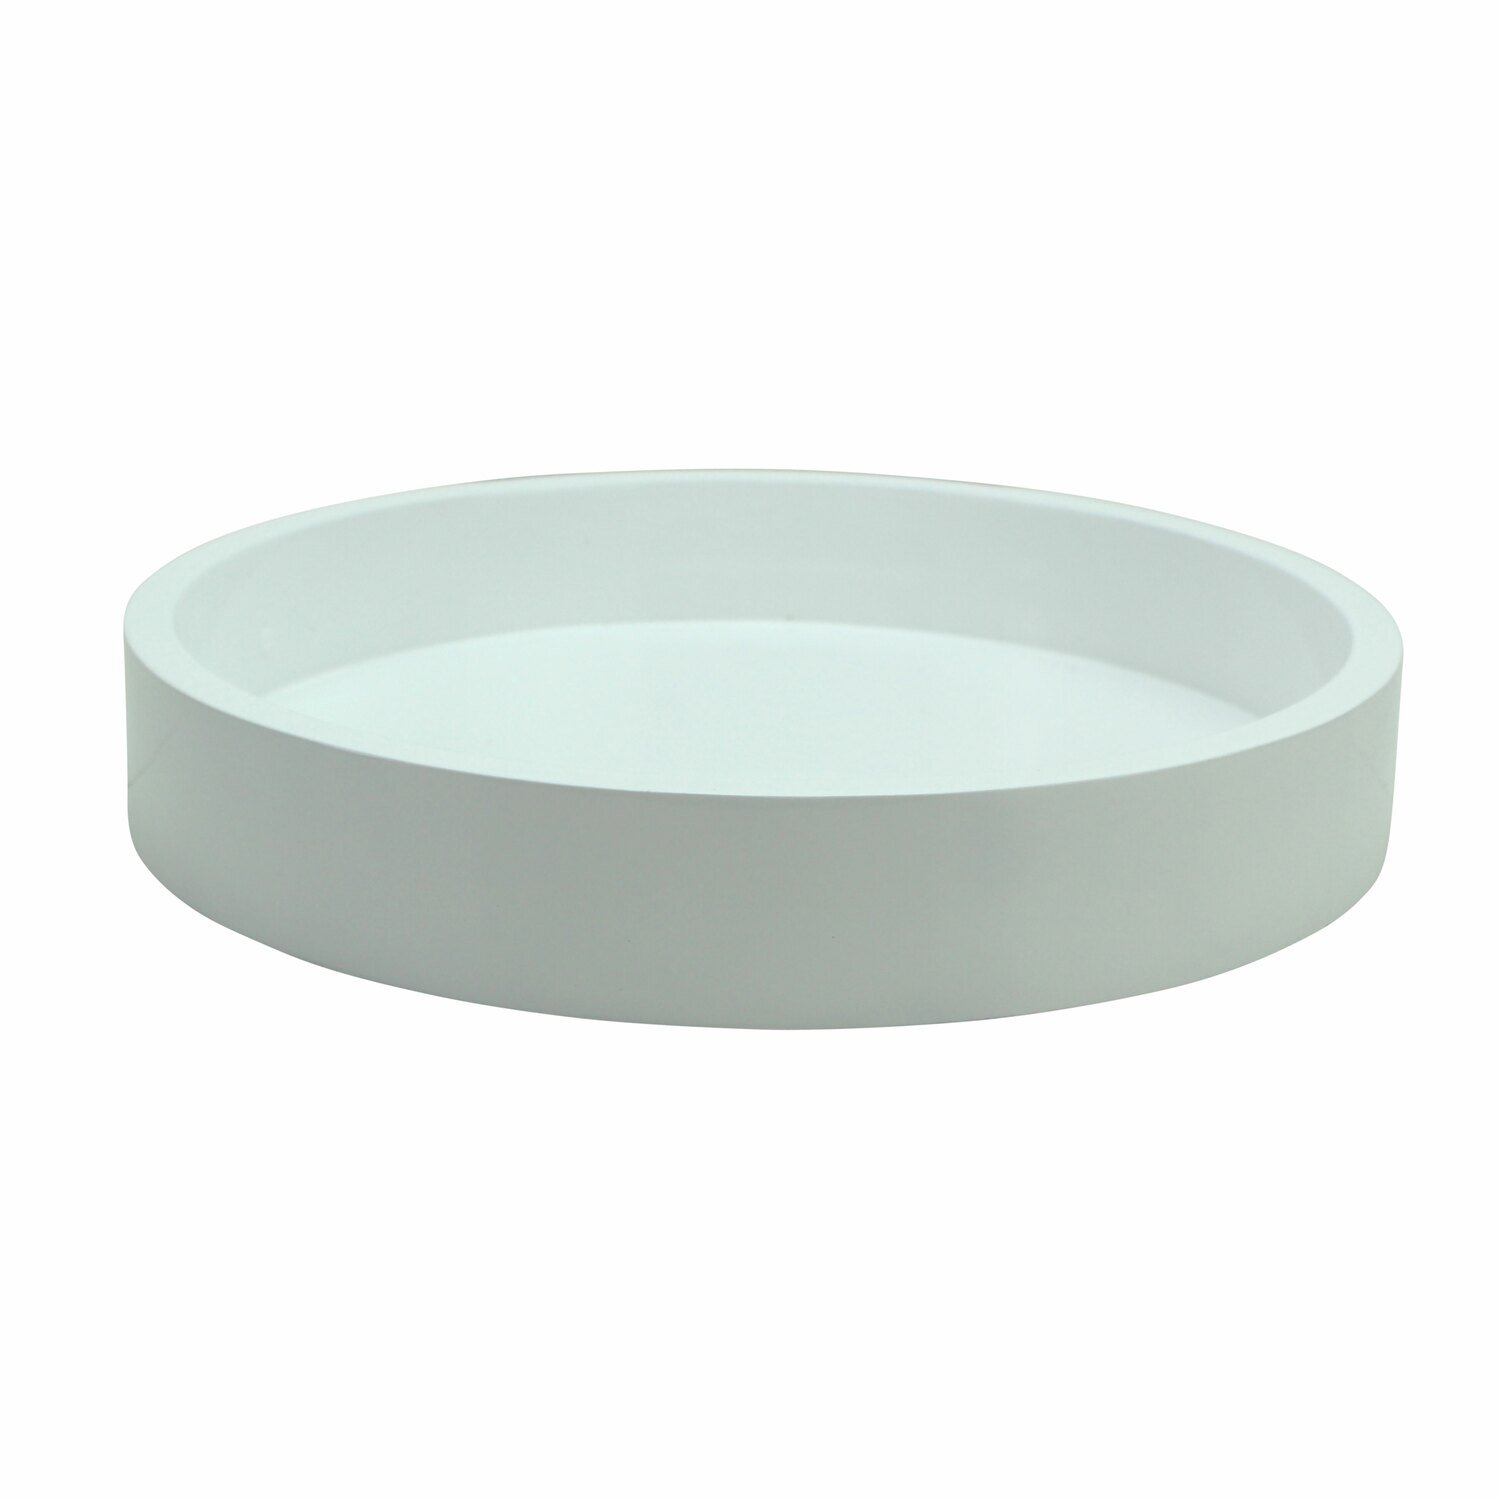 Addison Ross 8.5 x 8.5 Inch Round Tray White Wood TR8200